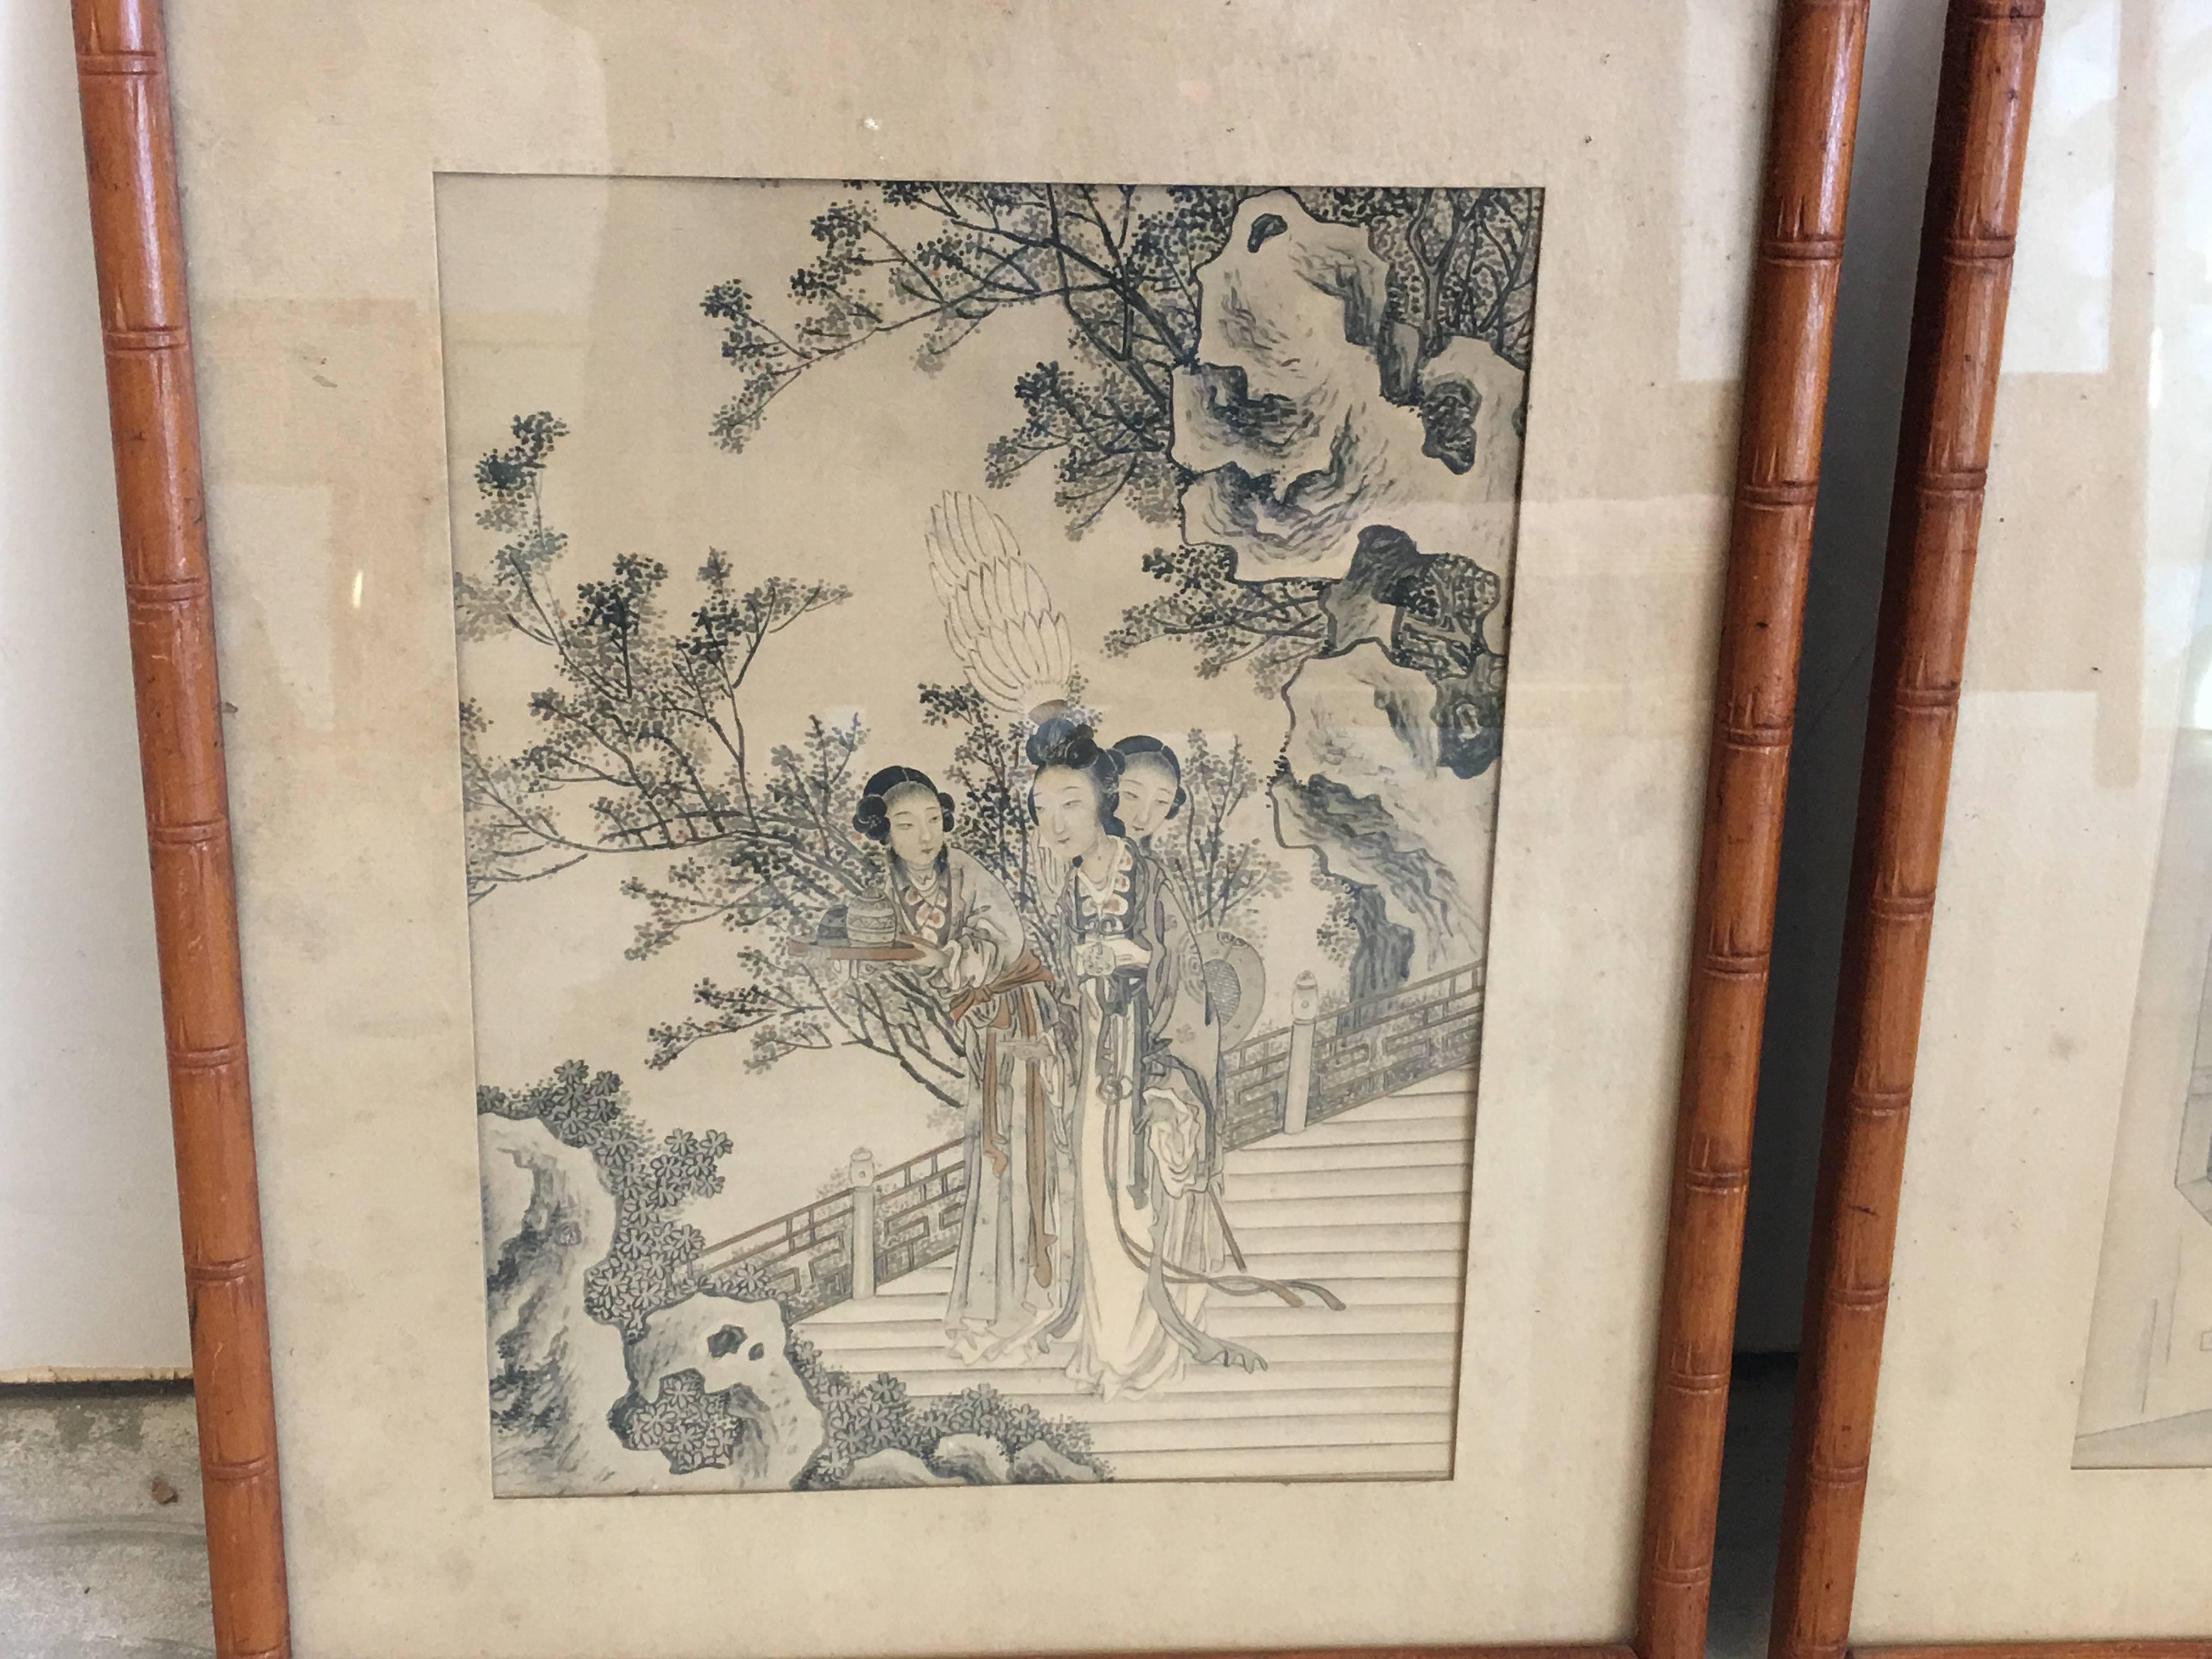 Offered are a stunning pair of 1930s prints with ornate Asian women, both framed in faux bamboo.